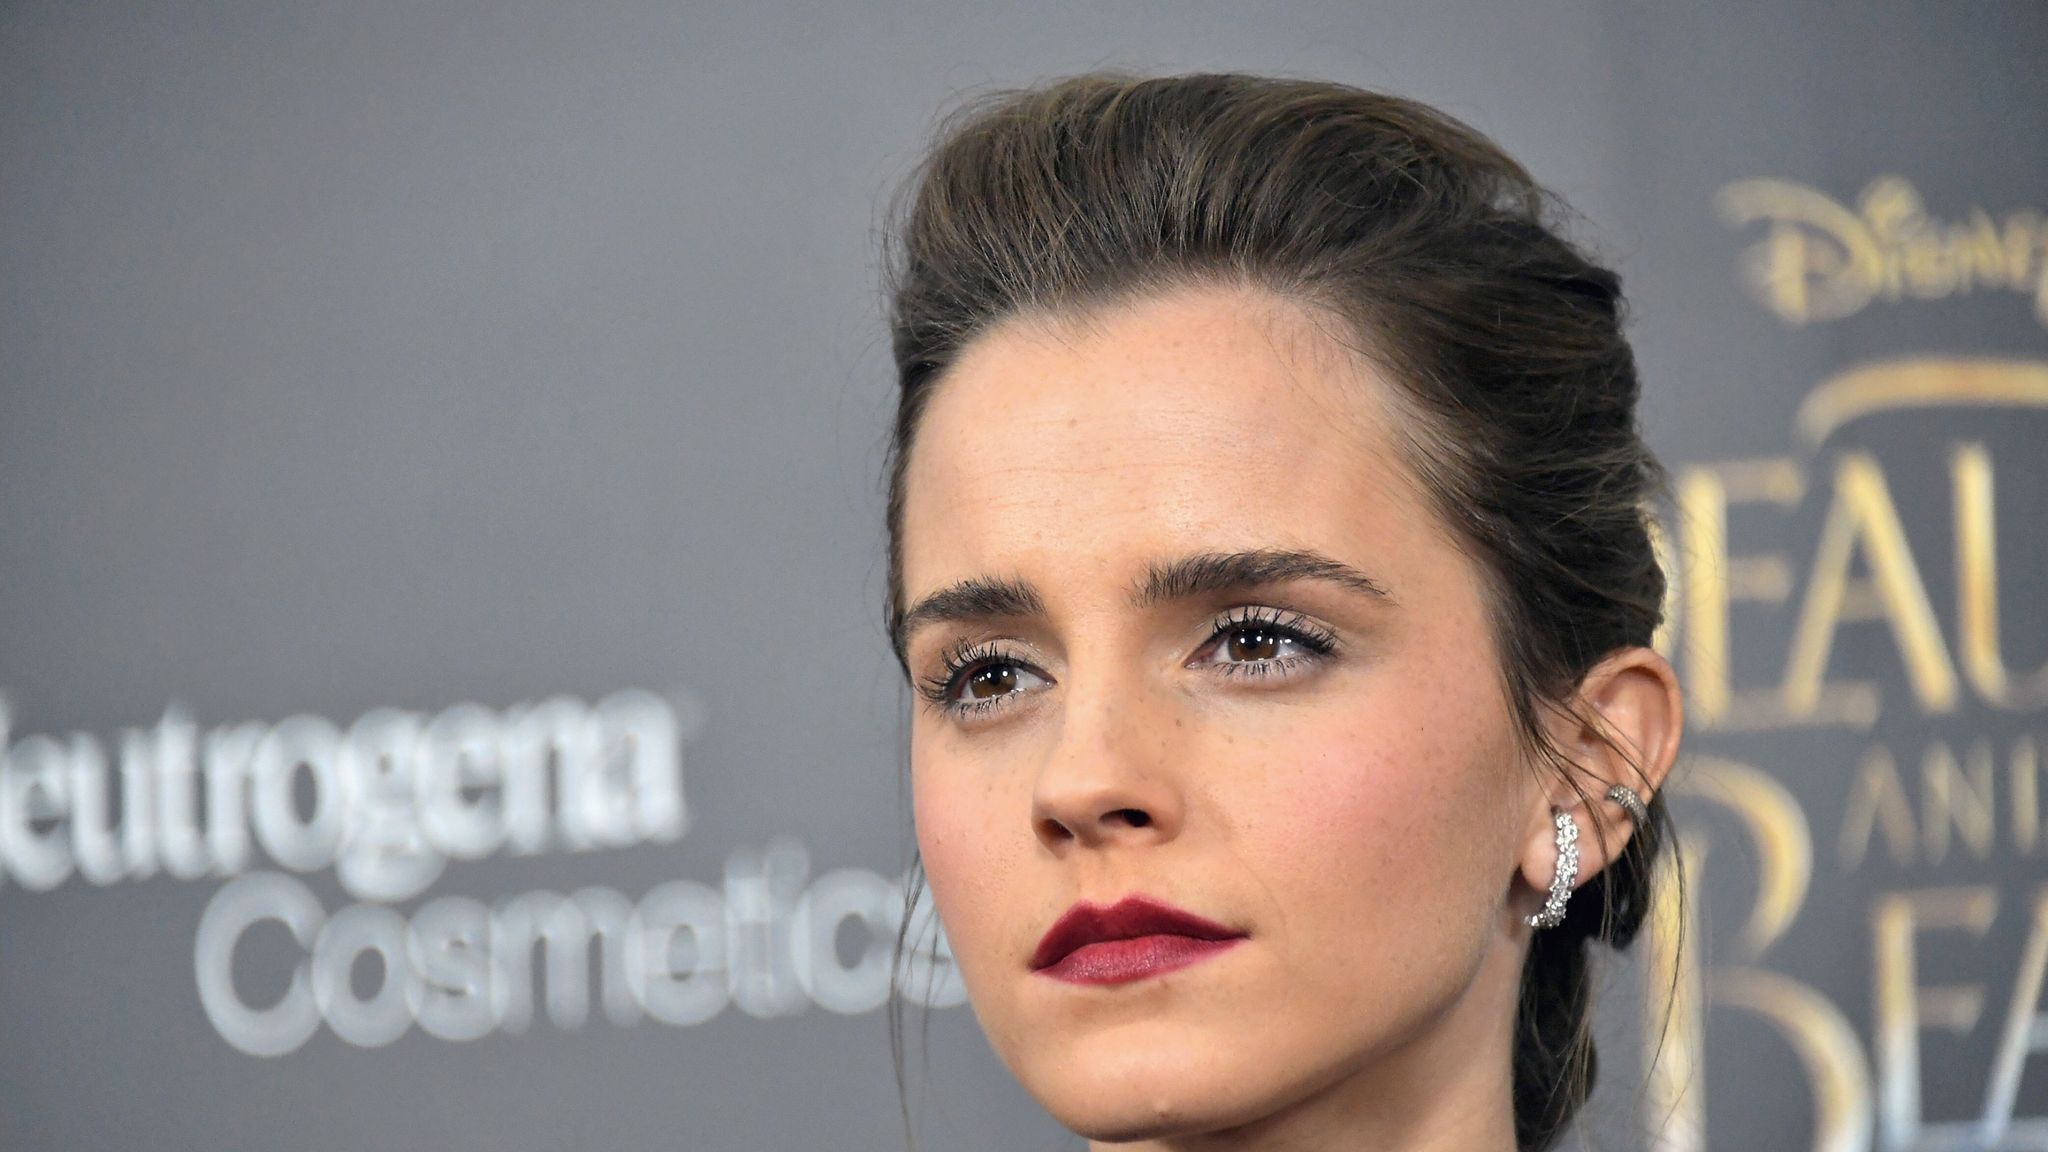 Emma Watson to take legal action over hacked photos.